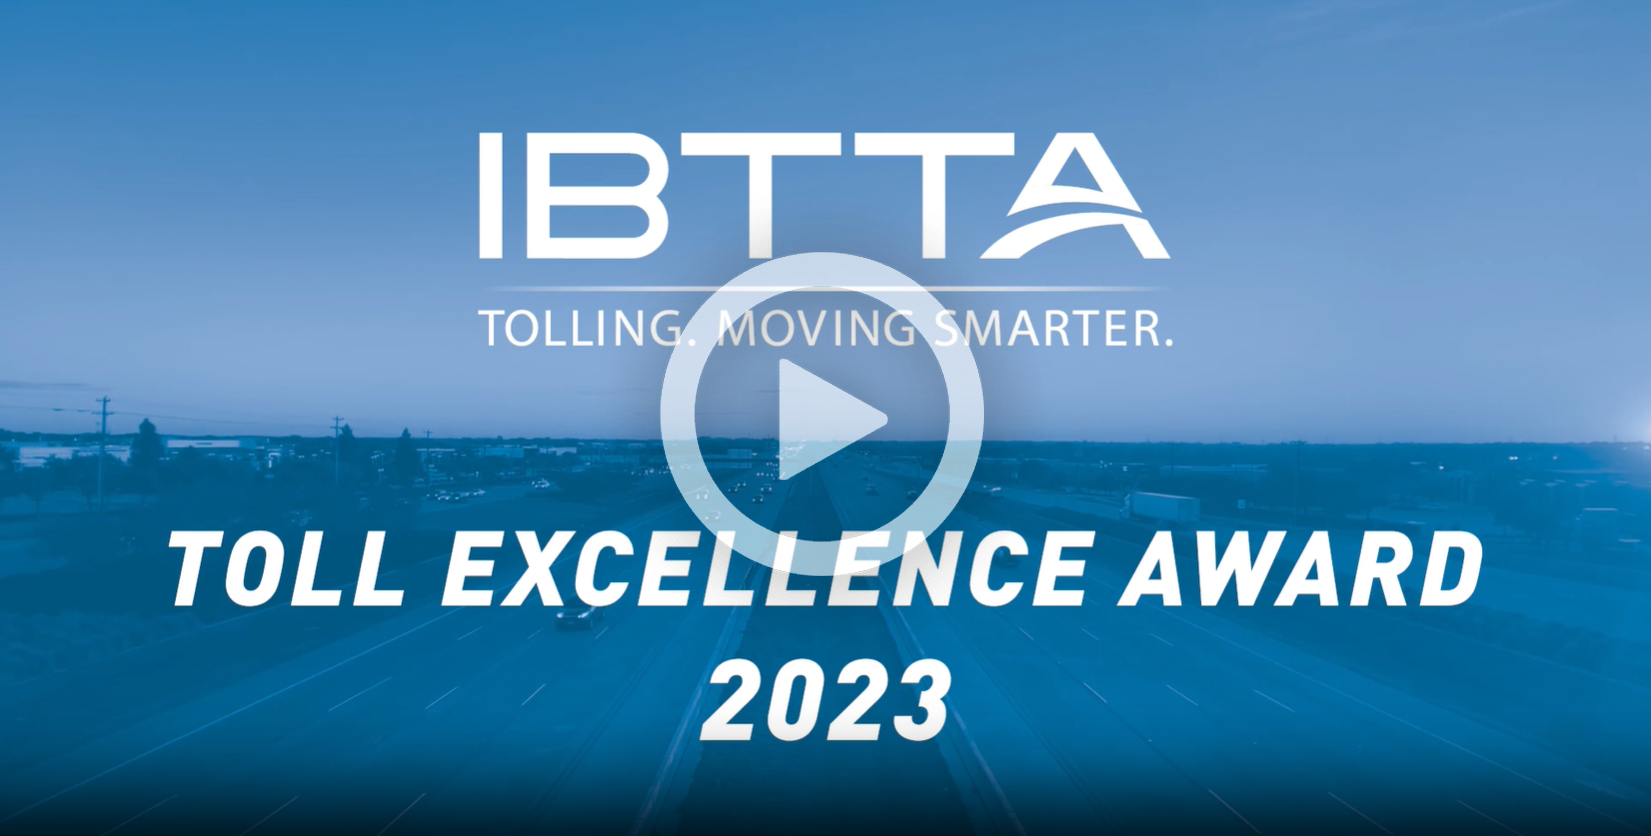 IBTTA Tolling. Moving Smarter. Toll Excellence Award 2023